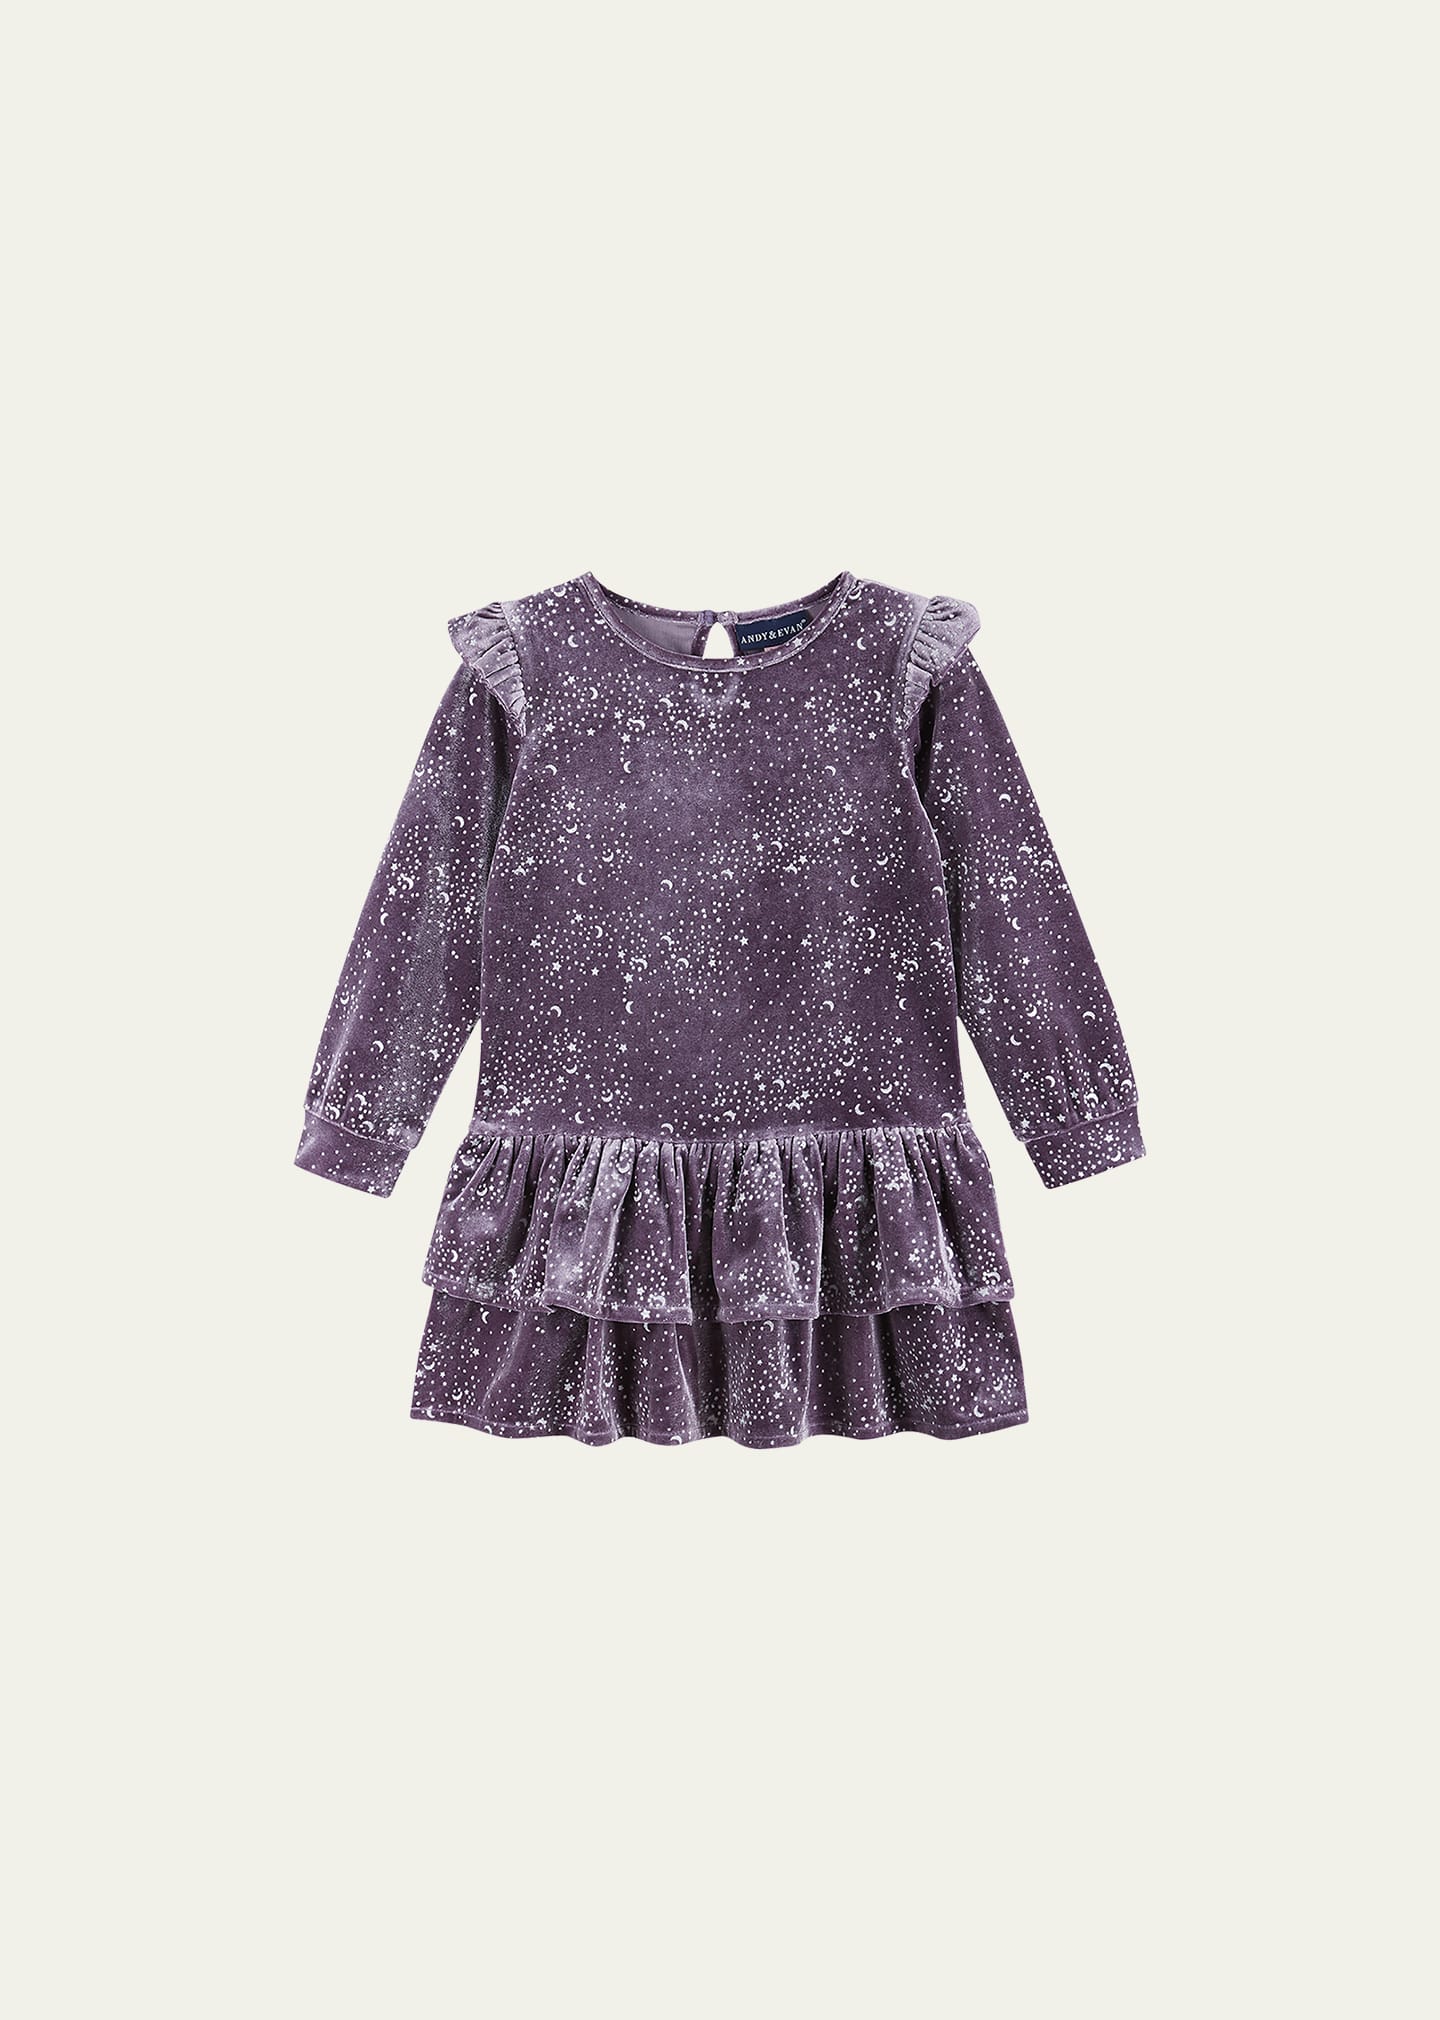 Andy & Evan Girl's Tiered Ruffle Trim Dress, Size 2-6X